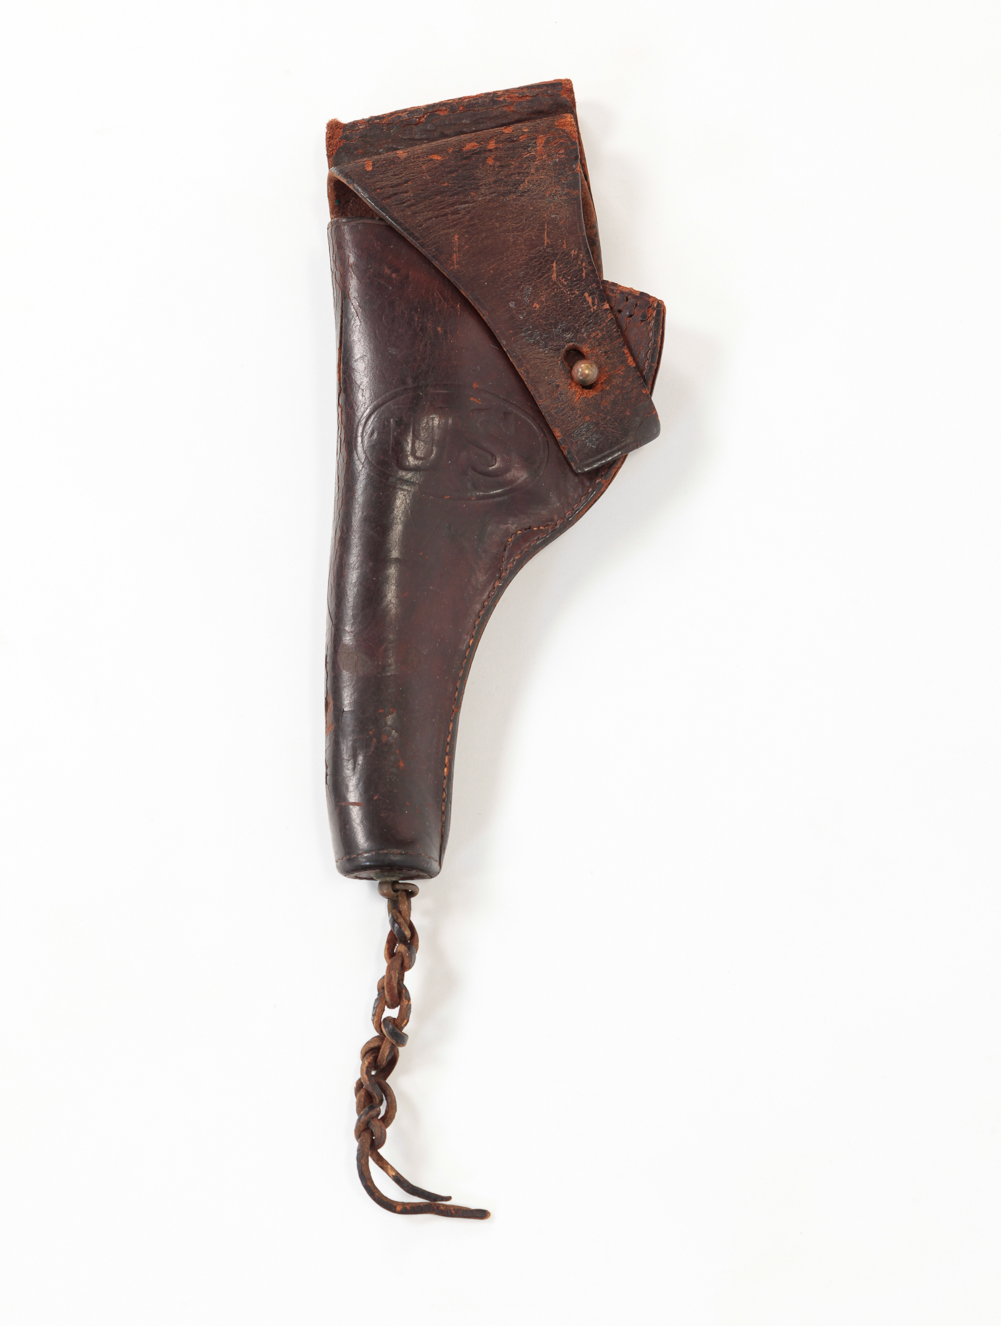 1917 U.S. LEATHER G & K HOLSTER